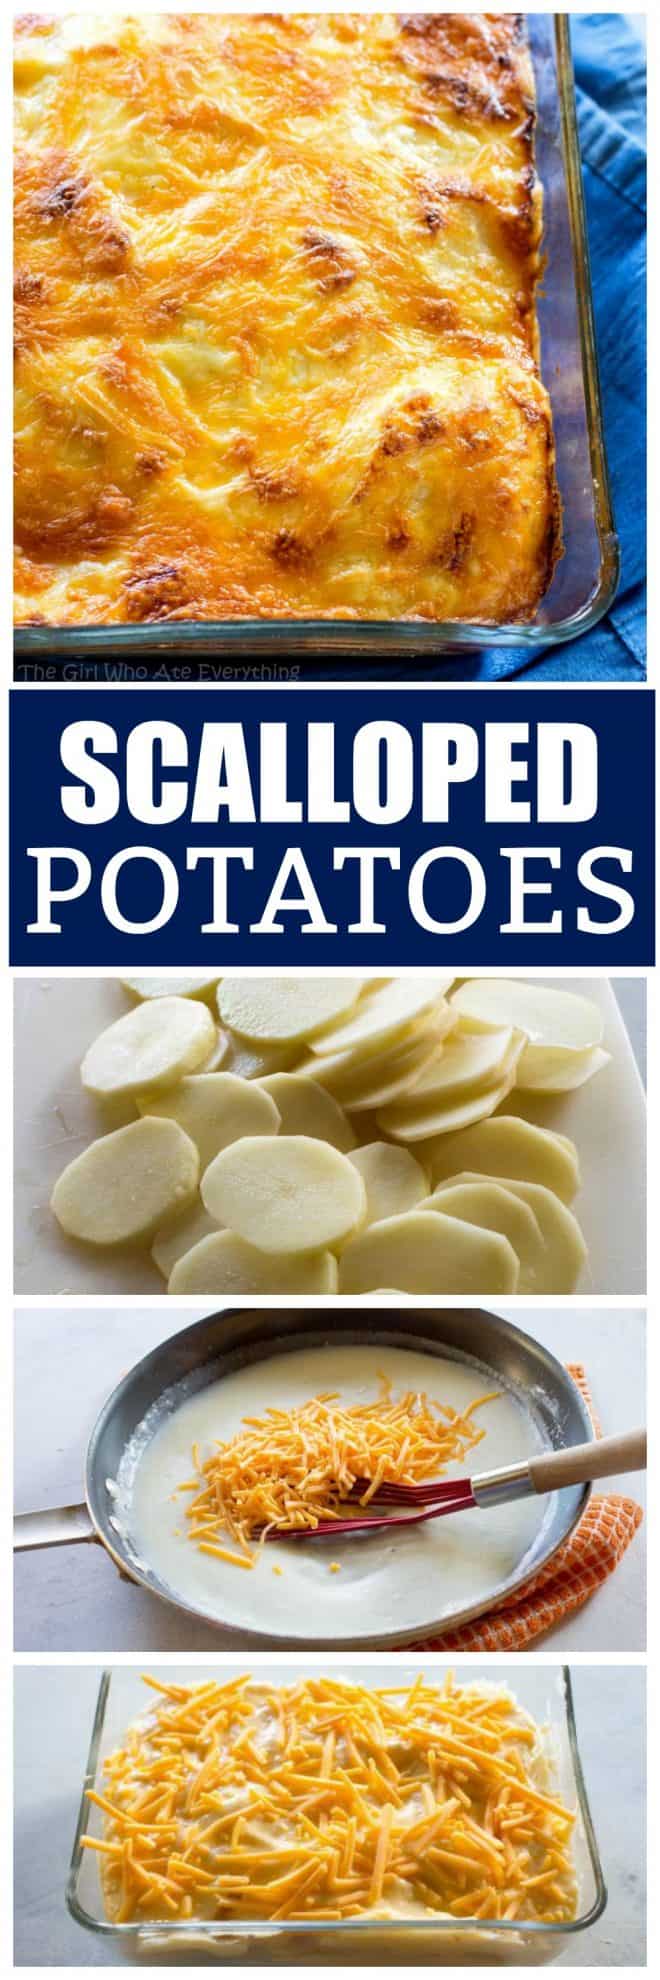 https://www.the-girl-who-ate-everything.com/wp-content/uploads/2019/12/scalloped-potatoes-660x1980.jpg